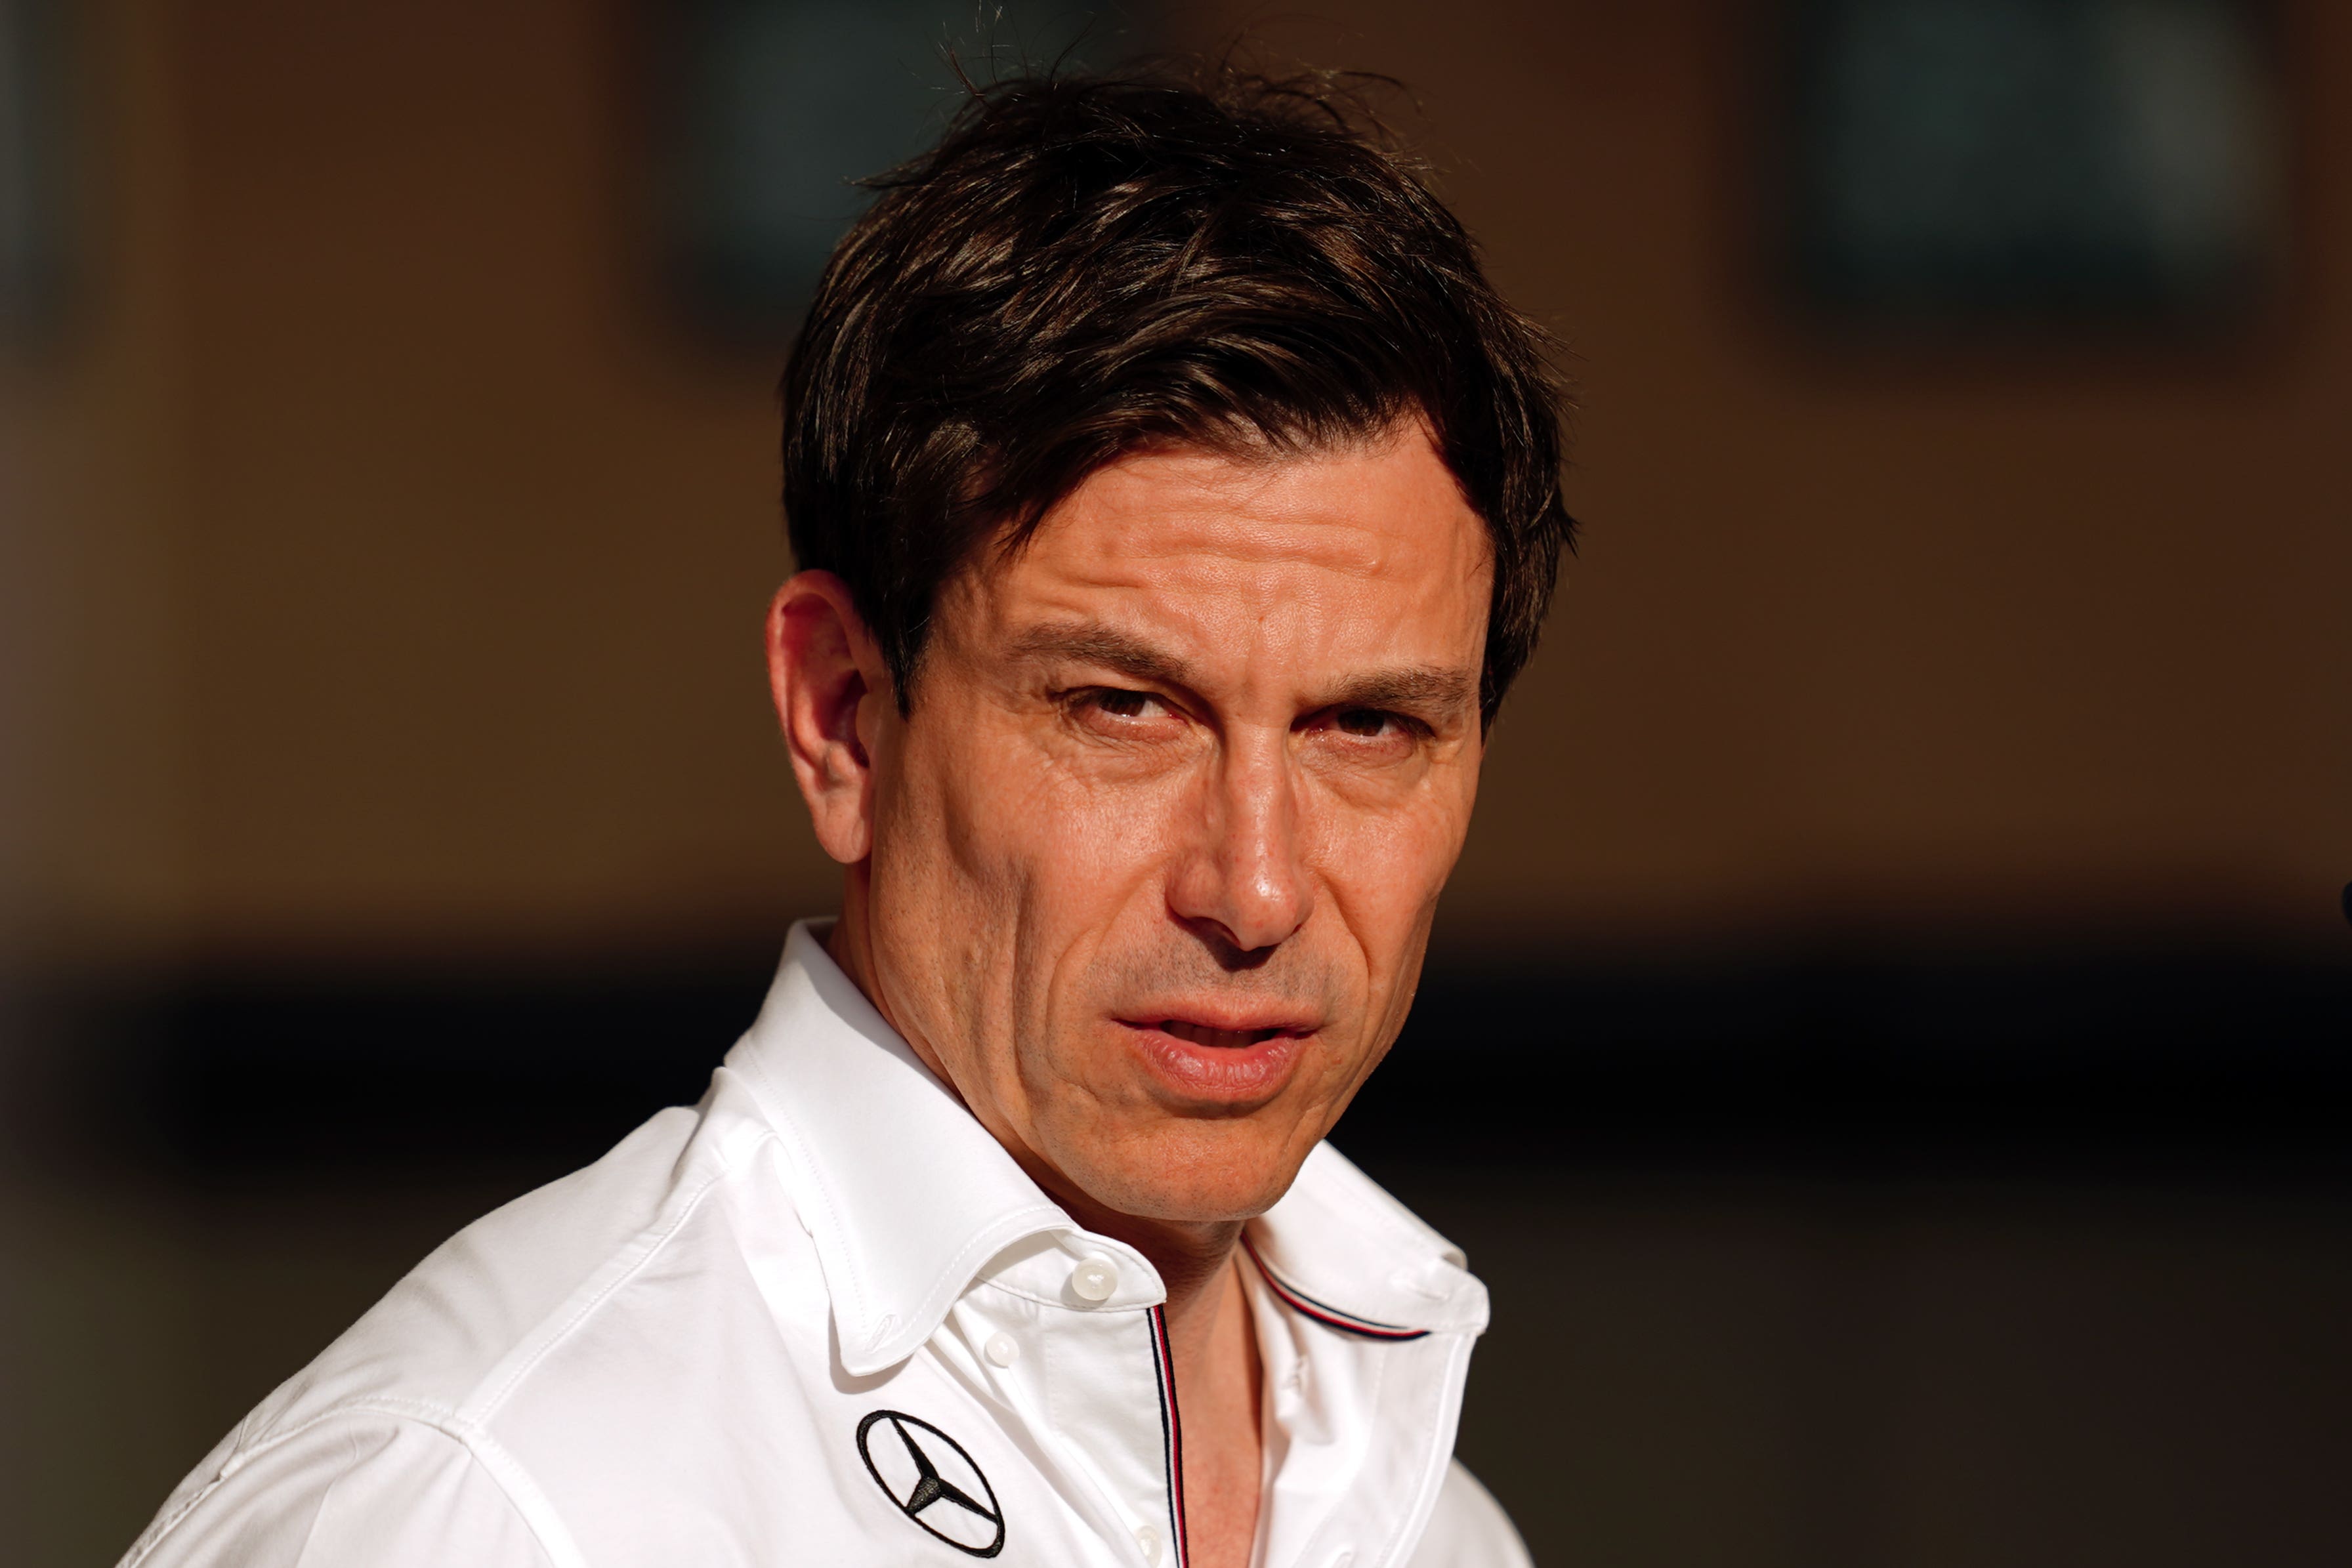 Toto Wolff insists Mercedes now need to be “radical” with their car approach